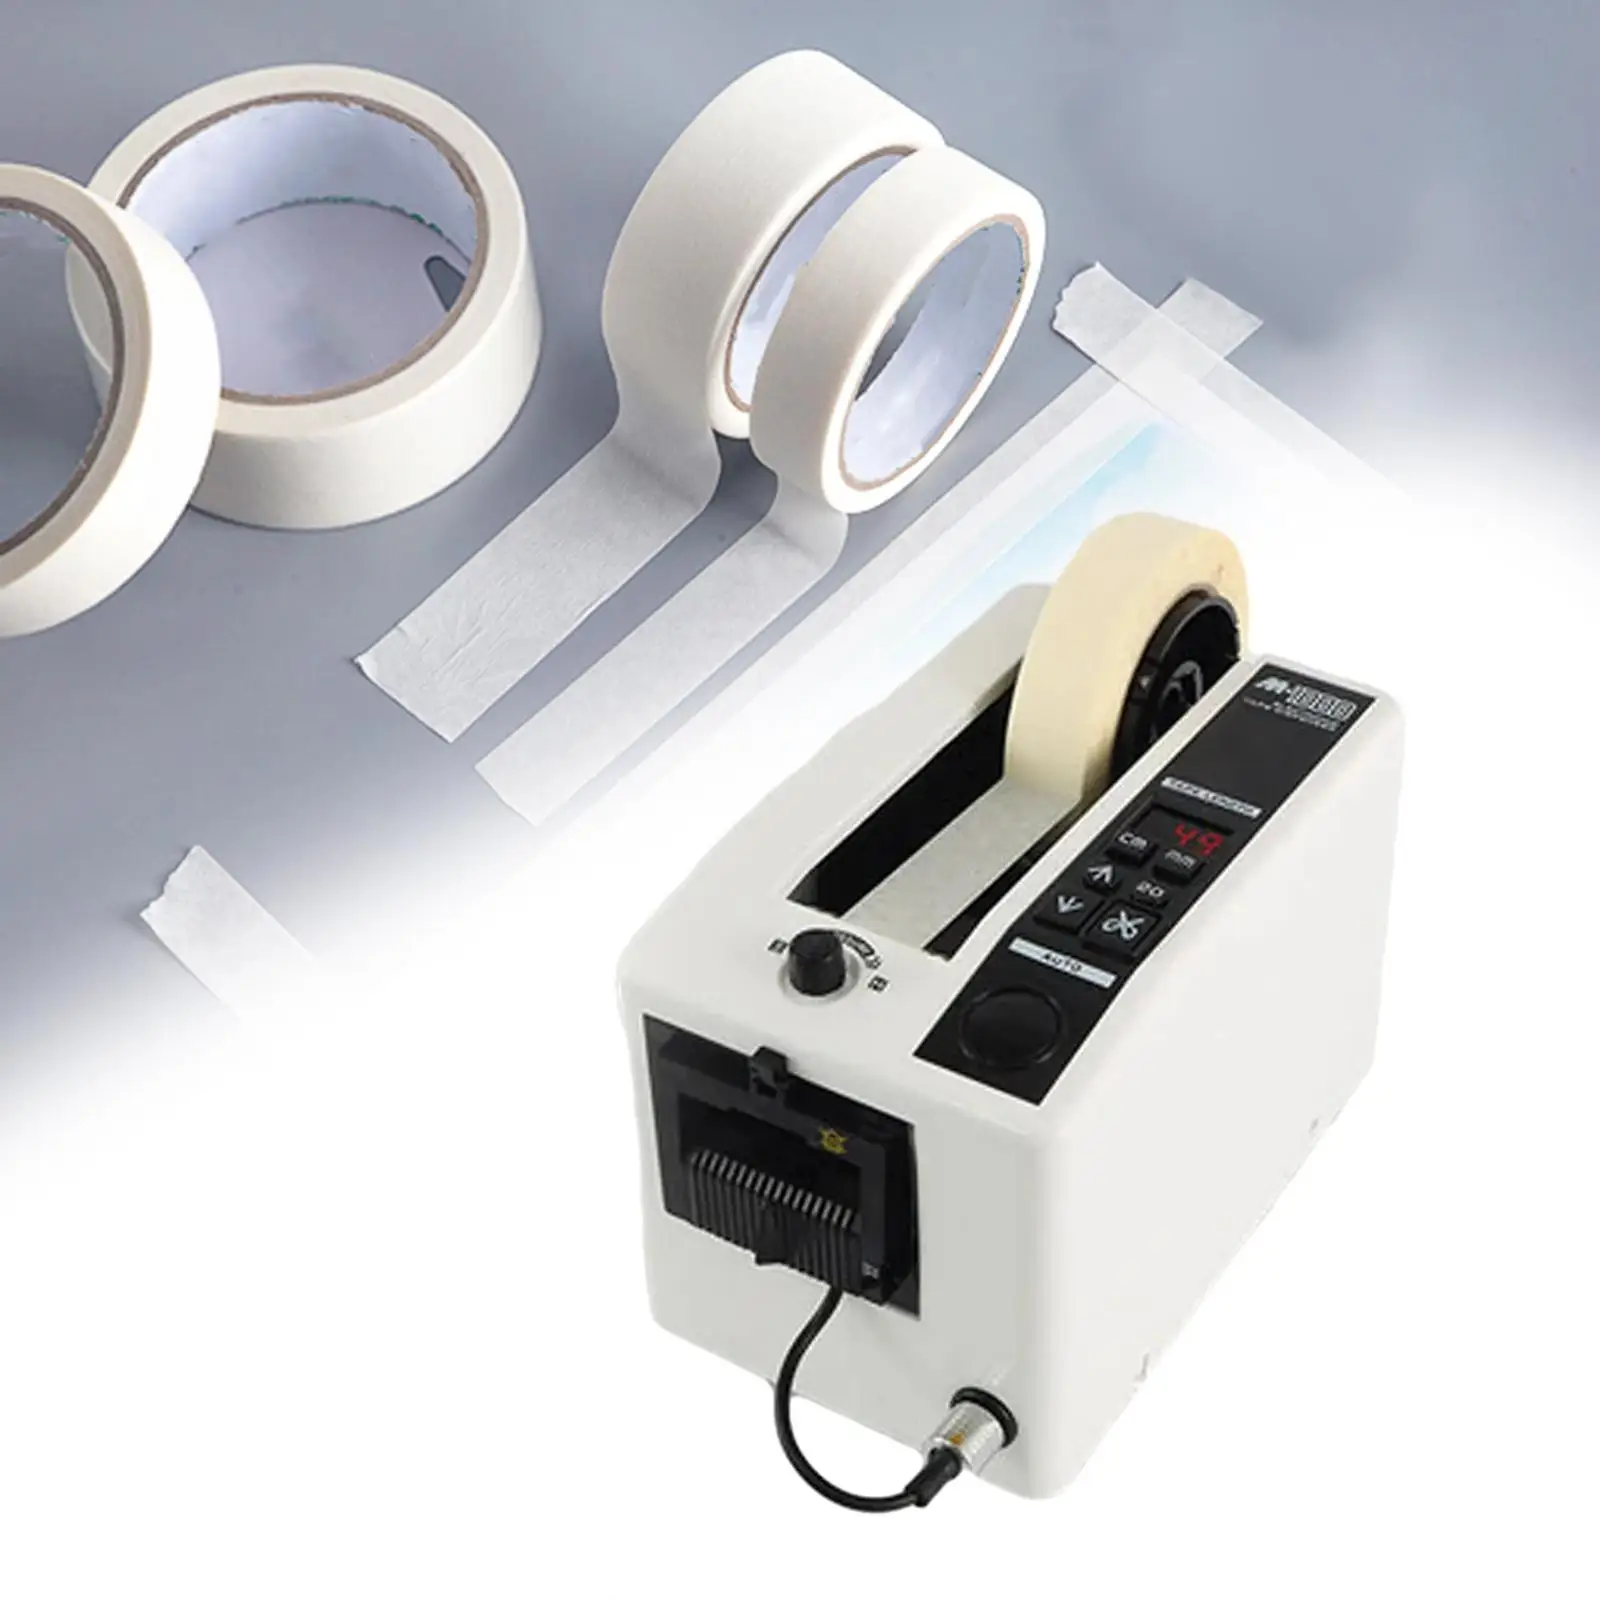 Automatic Tape Dispenser Portable Tape Cutter for 6-50mm Width Tapes Packaging Tape Transparent Tape Commercial or Personal Use